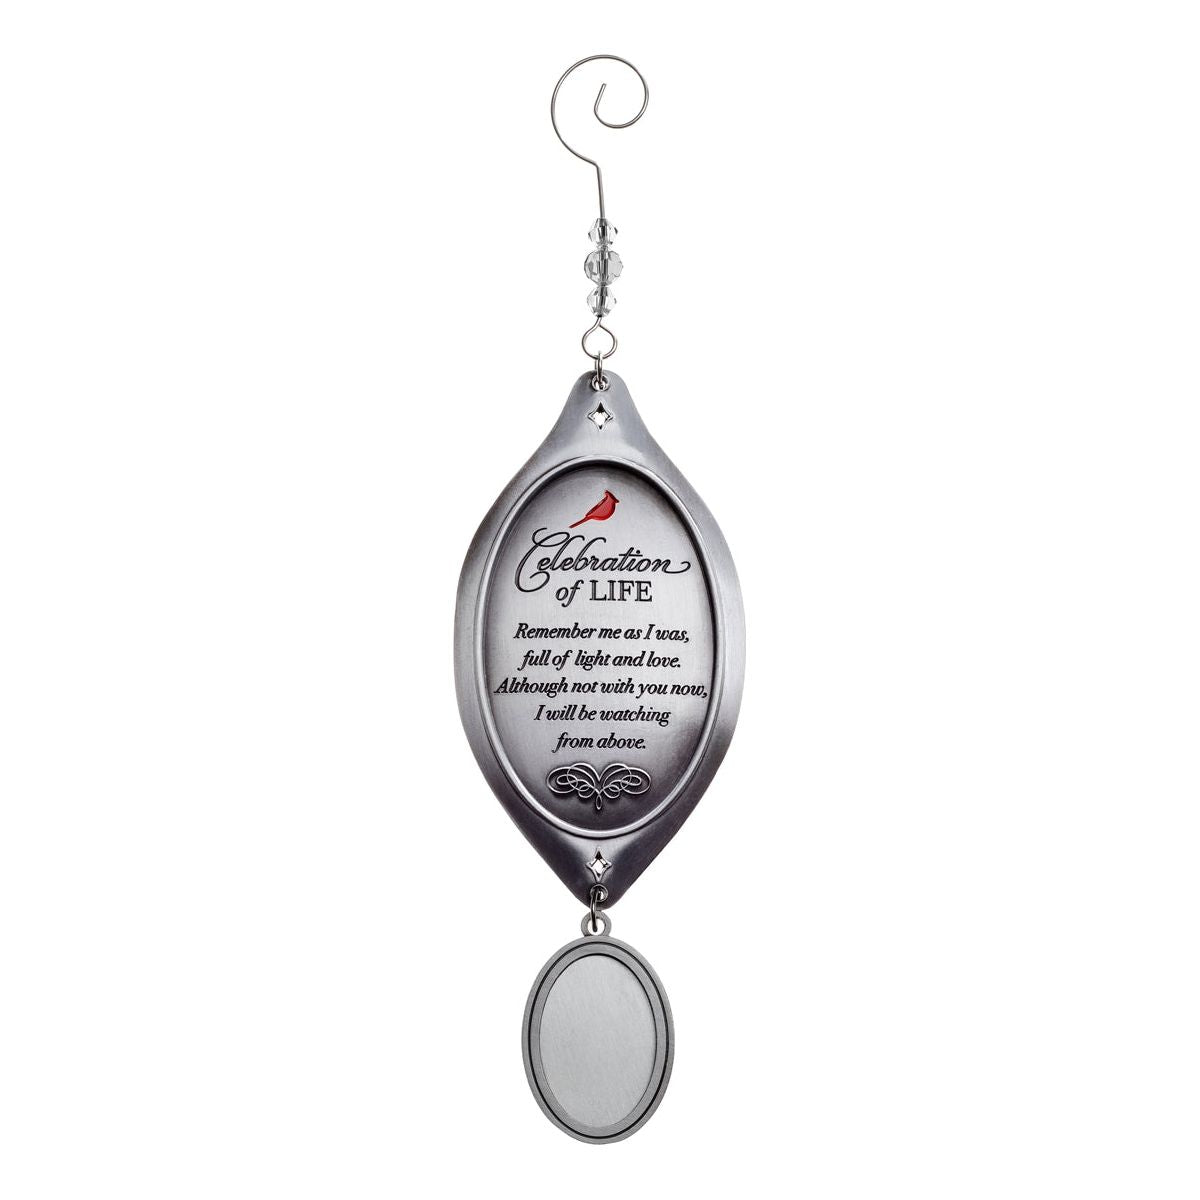 Celebration of Life Memorial Ornament- Cast metal top engraved with &quot;Celebration of Life&quot; sentiment and attached photo pendant.